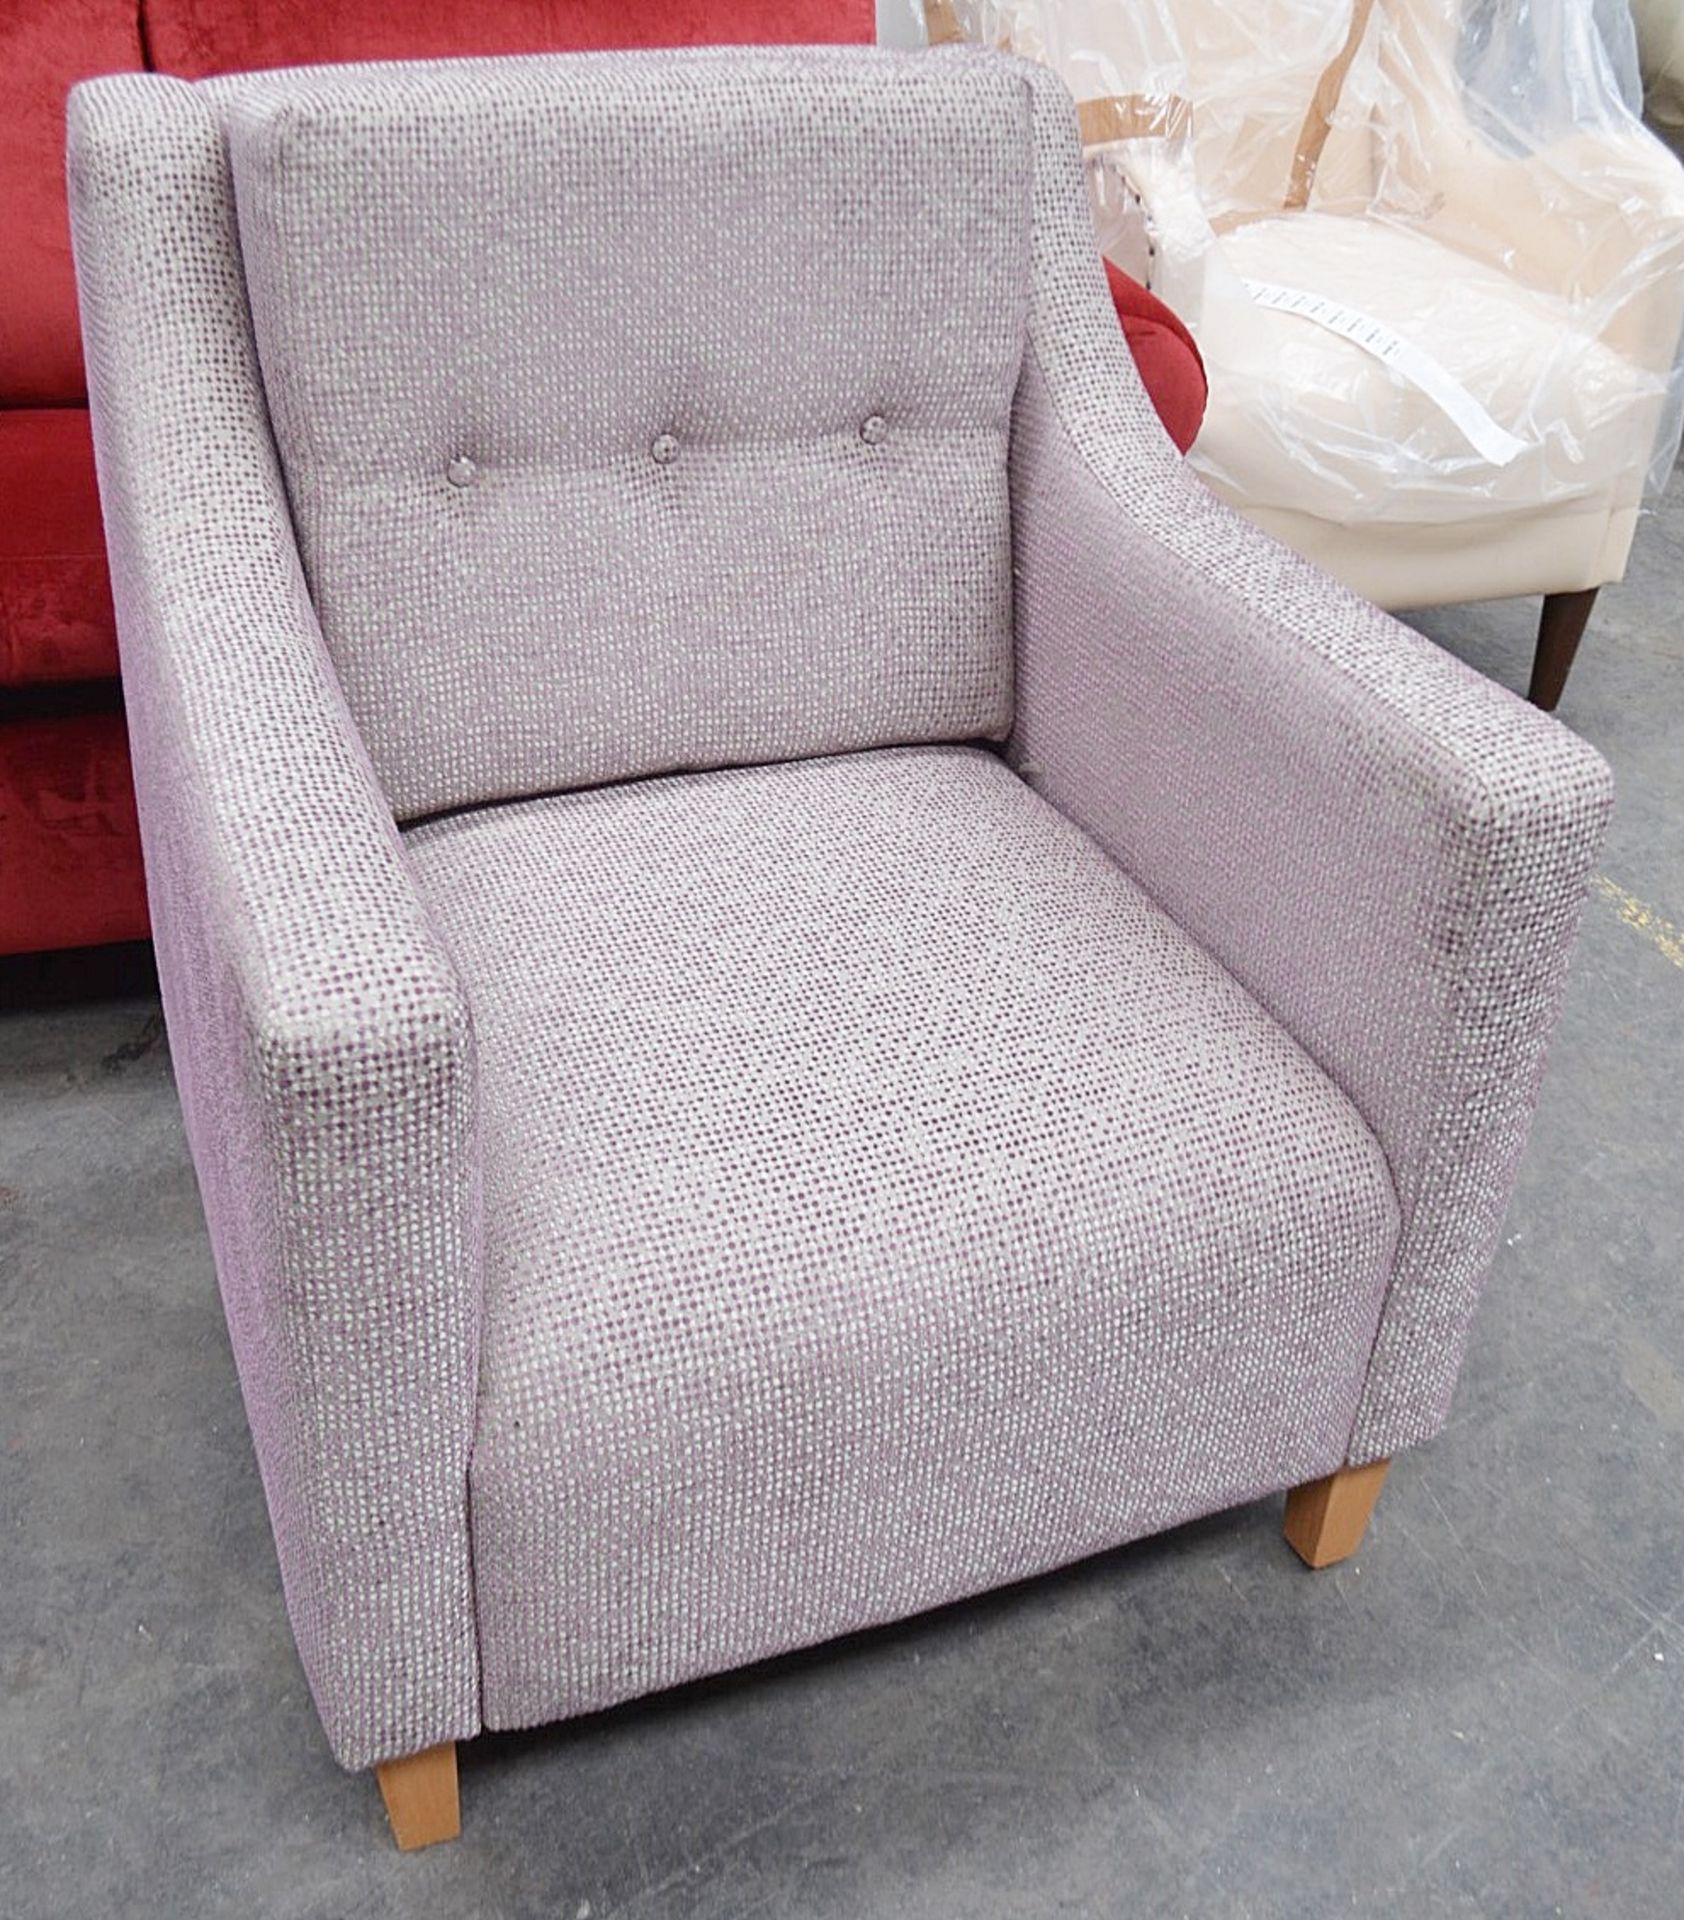 1 x Large Commercial Armchair Upholstered In A Grey & Purple Premium Fabric